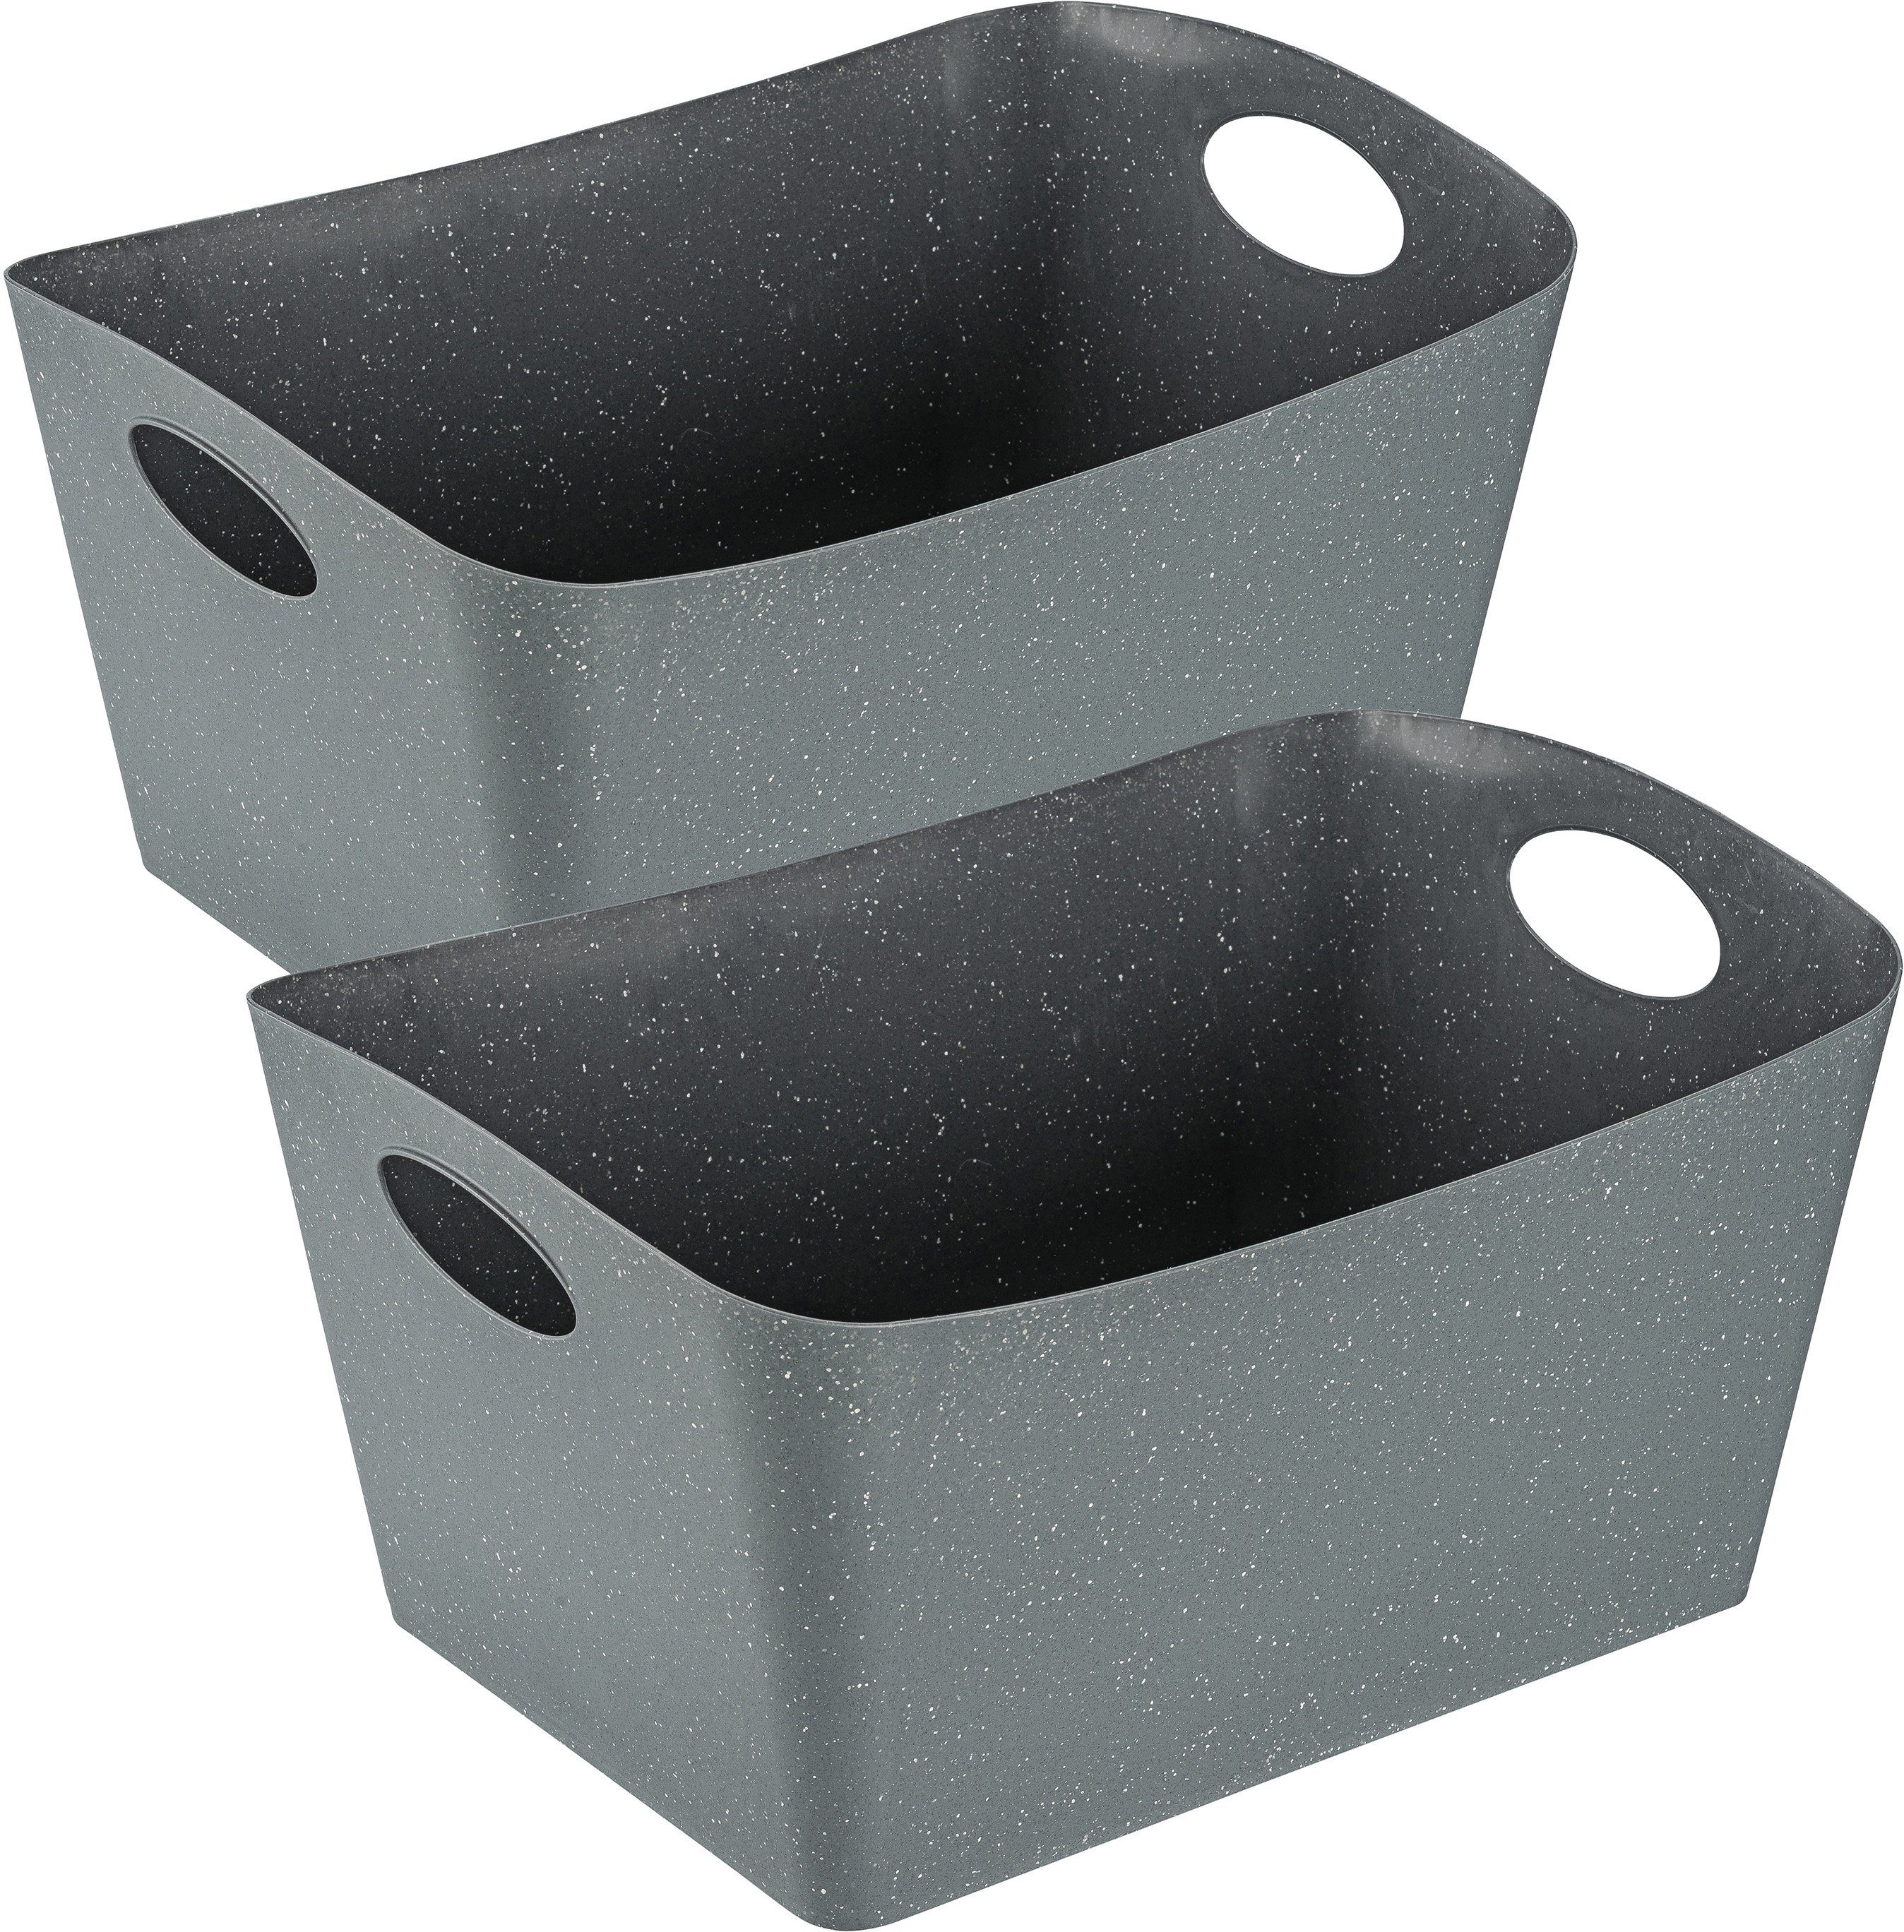 KOZIOL Organizer BOXXX L (Set, 2 St), Aufbewahrungsbox, Made in Germany, 100% recyceltes Material, 15 Liter recycled ash grey